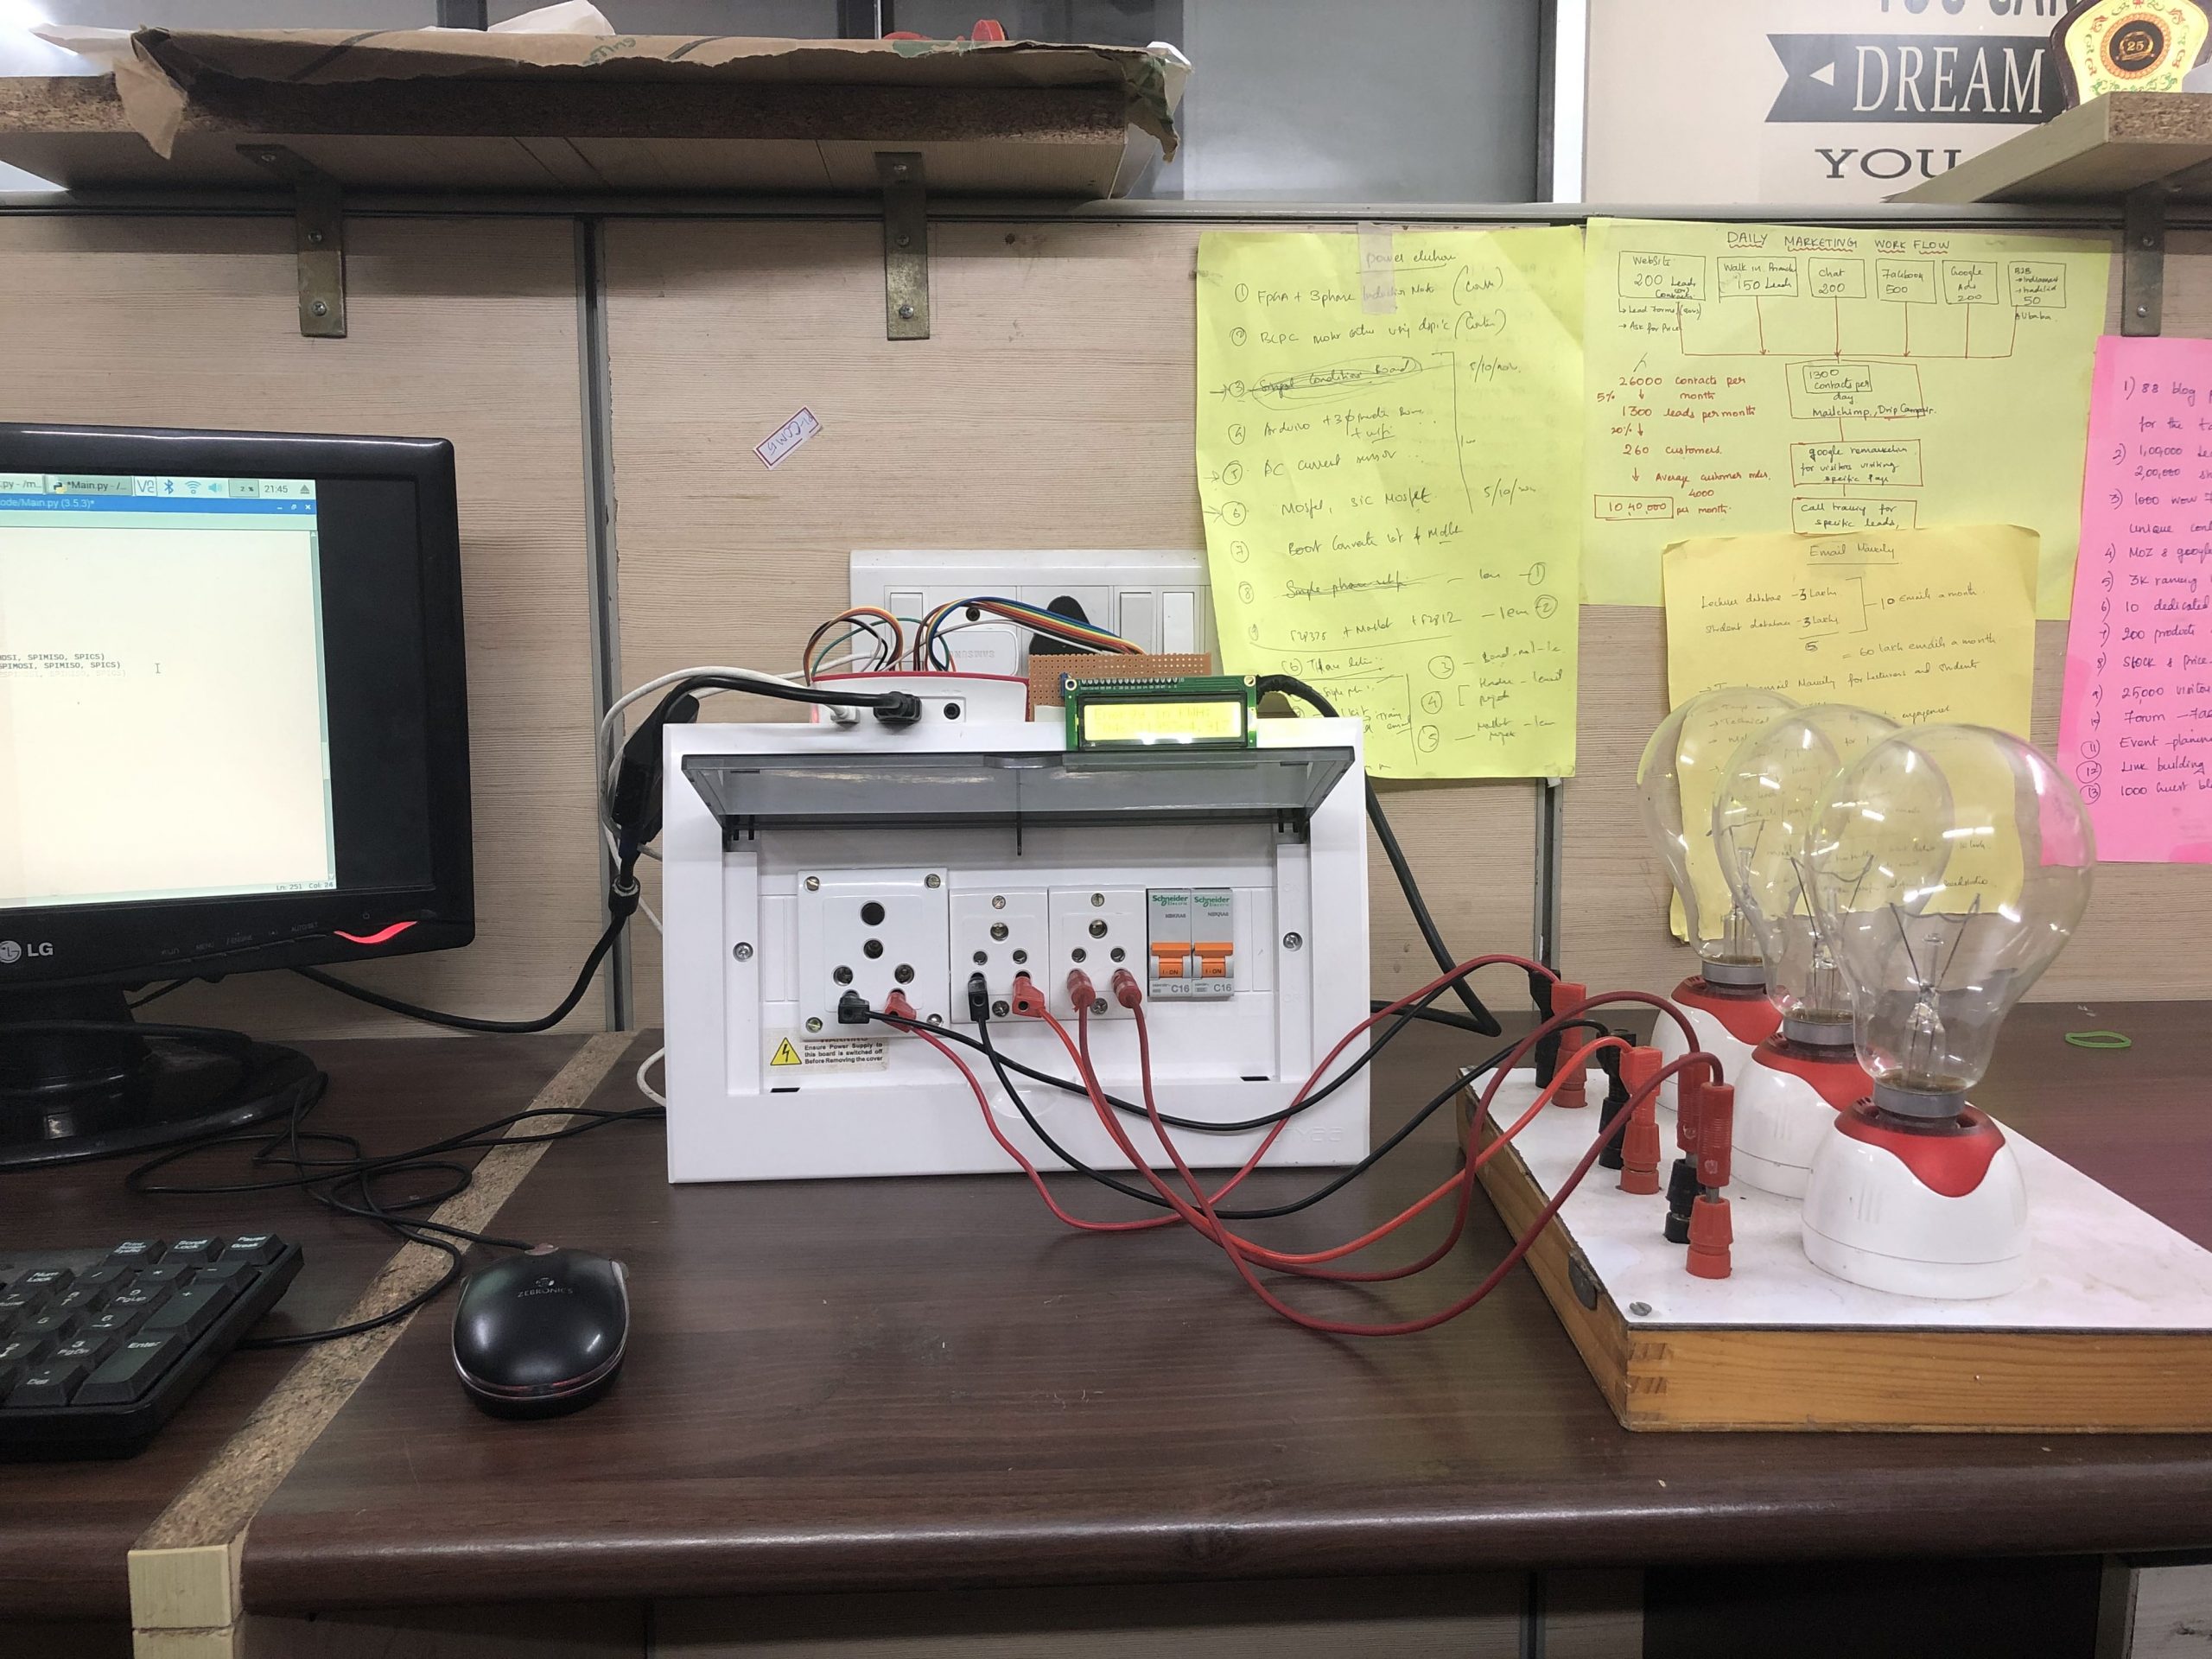 Real-Time Power Management Using Raspberry pi